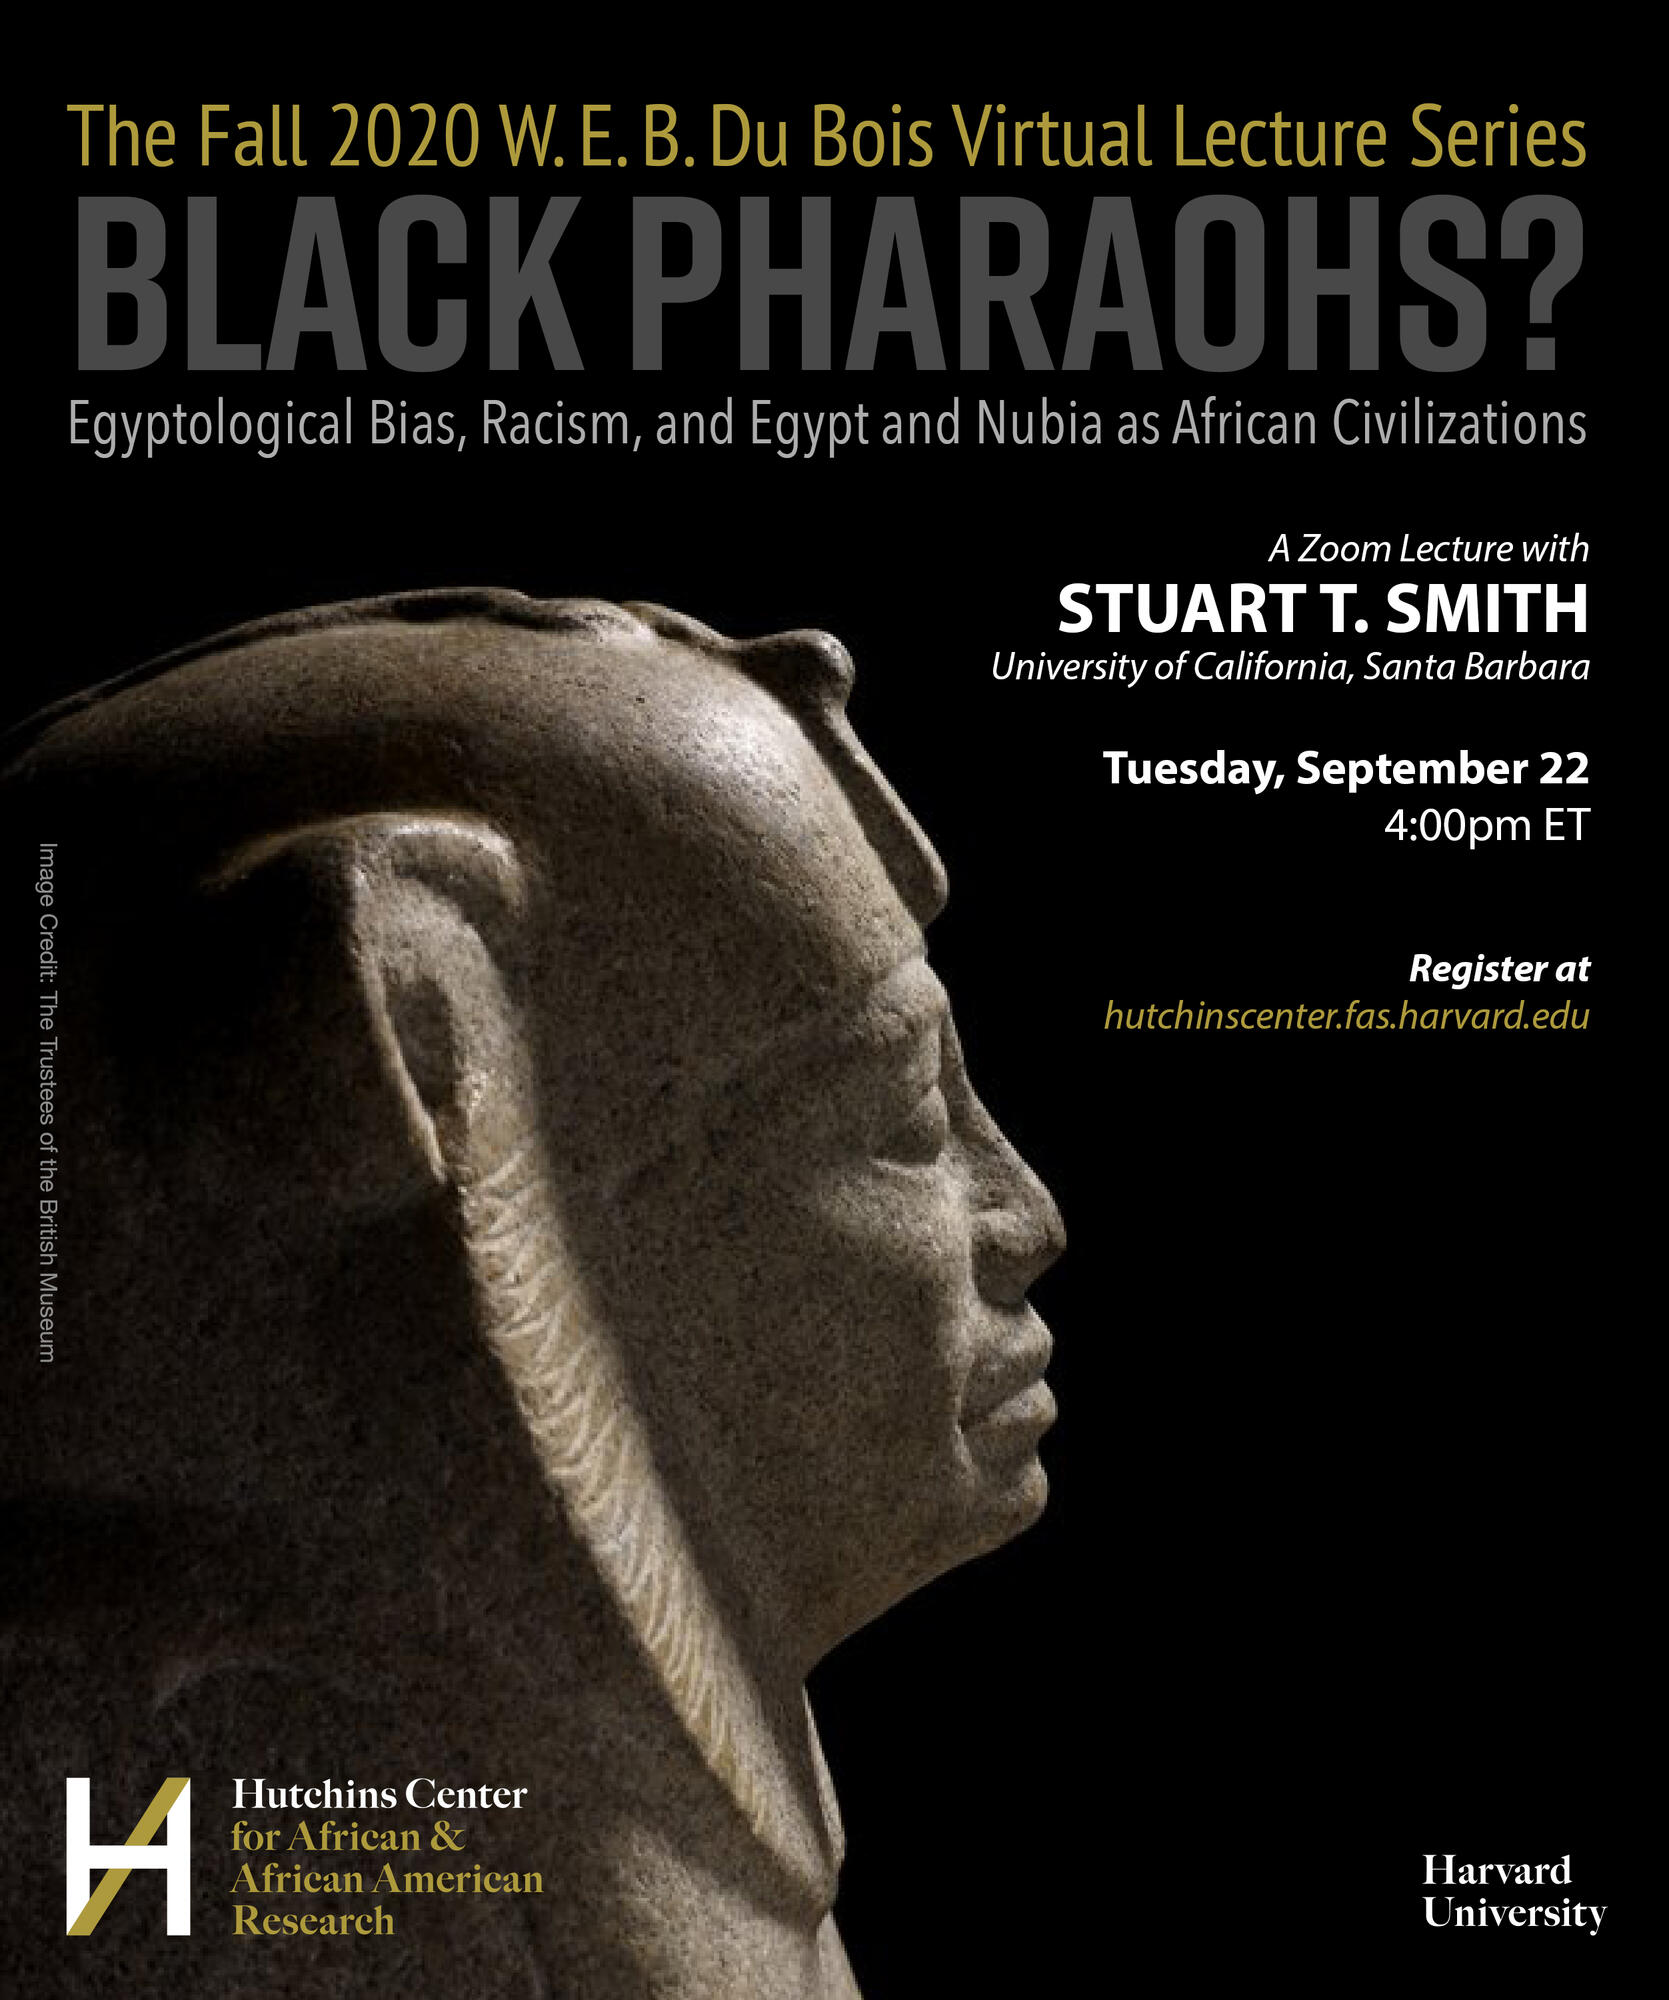 Flyer for Harvard University Fall 2020 W.E.B. Du Bois Virtual Lecture Series "Black Pharaohs?: Egyptological Bias, Racism, and Egypt and Nubia as African Civilizations" on 9/22/20 at 4PM ET